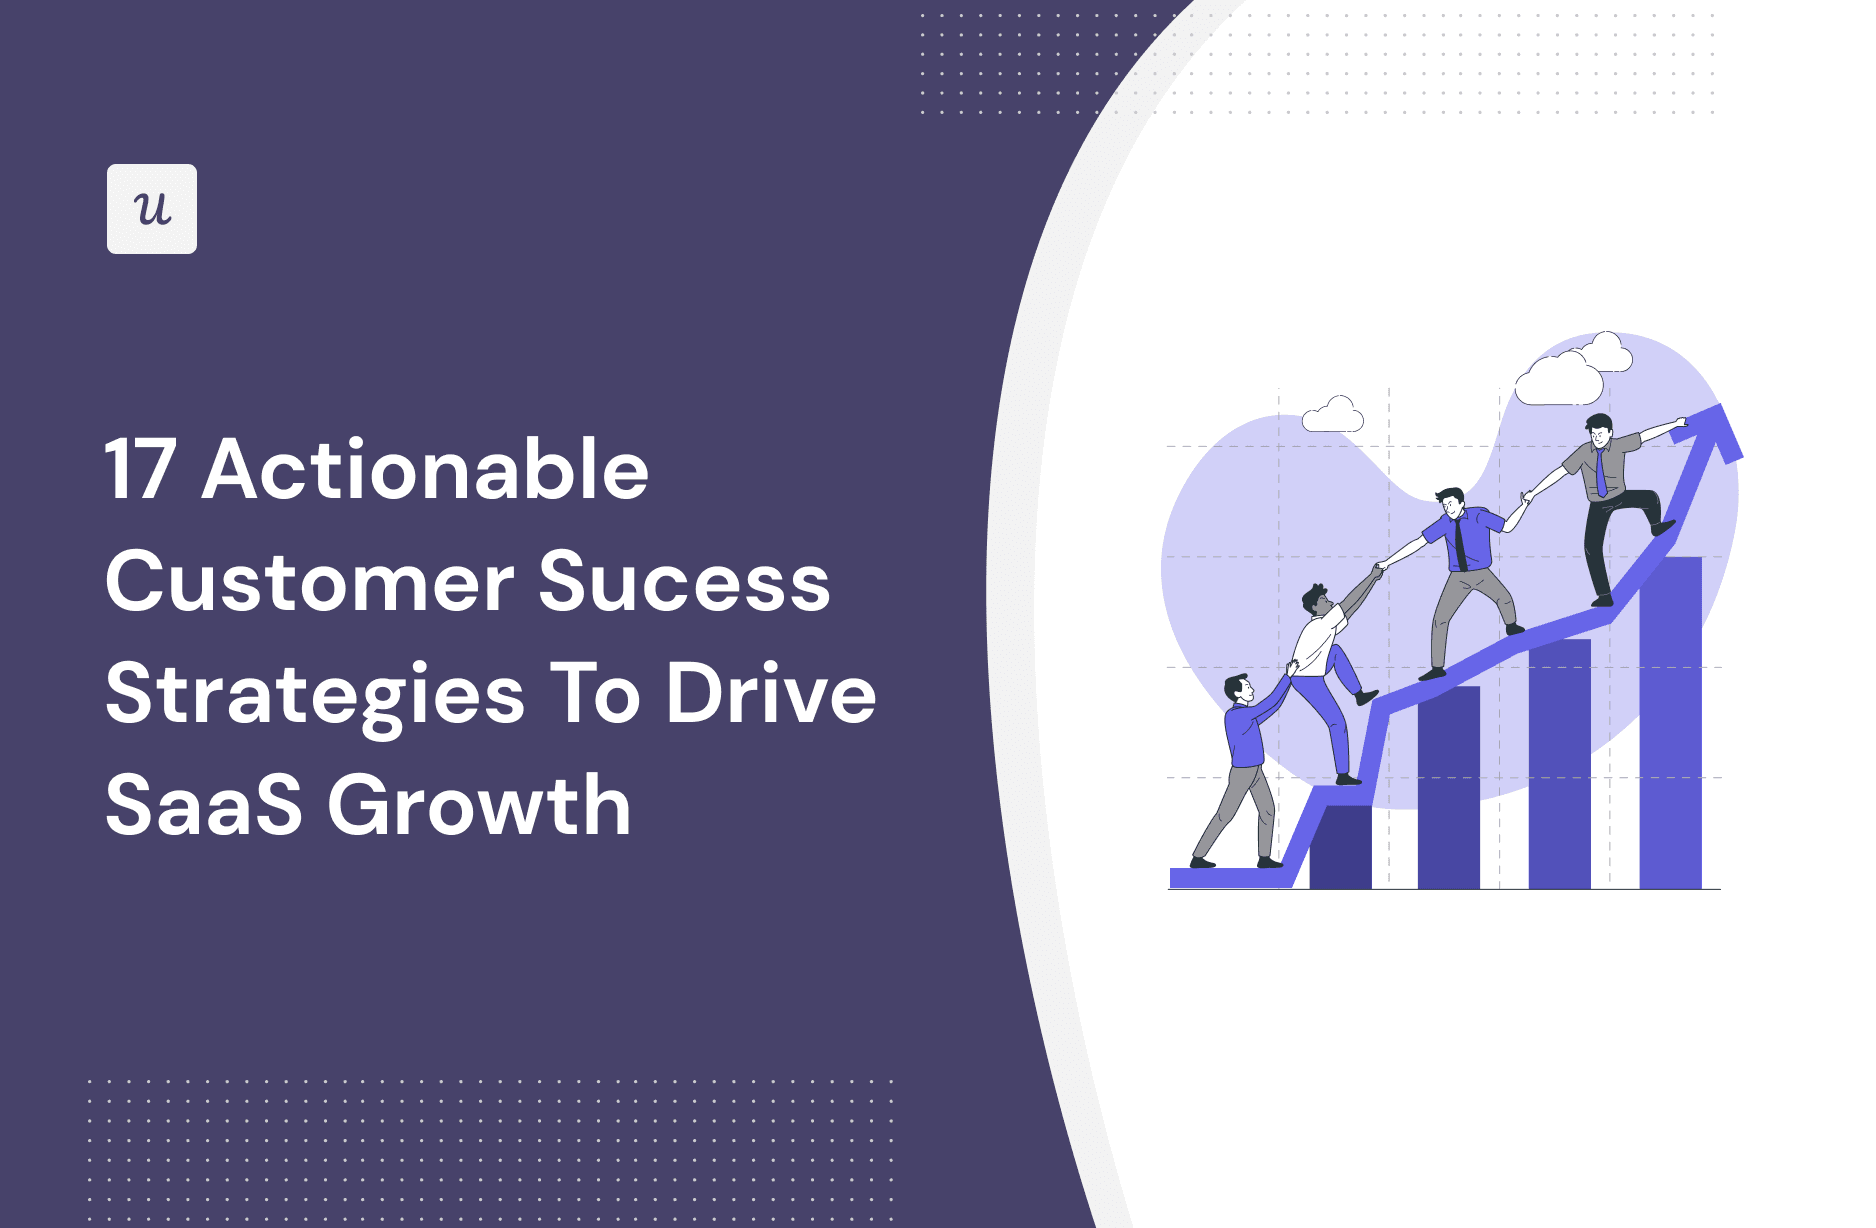 17 Actionable Customer Success Strategies To Drive SaaS Growth cover